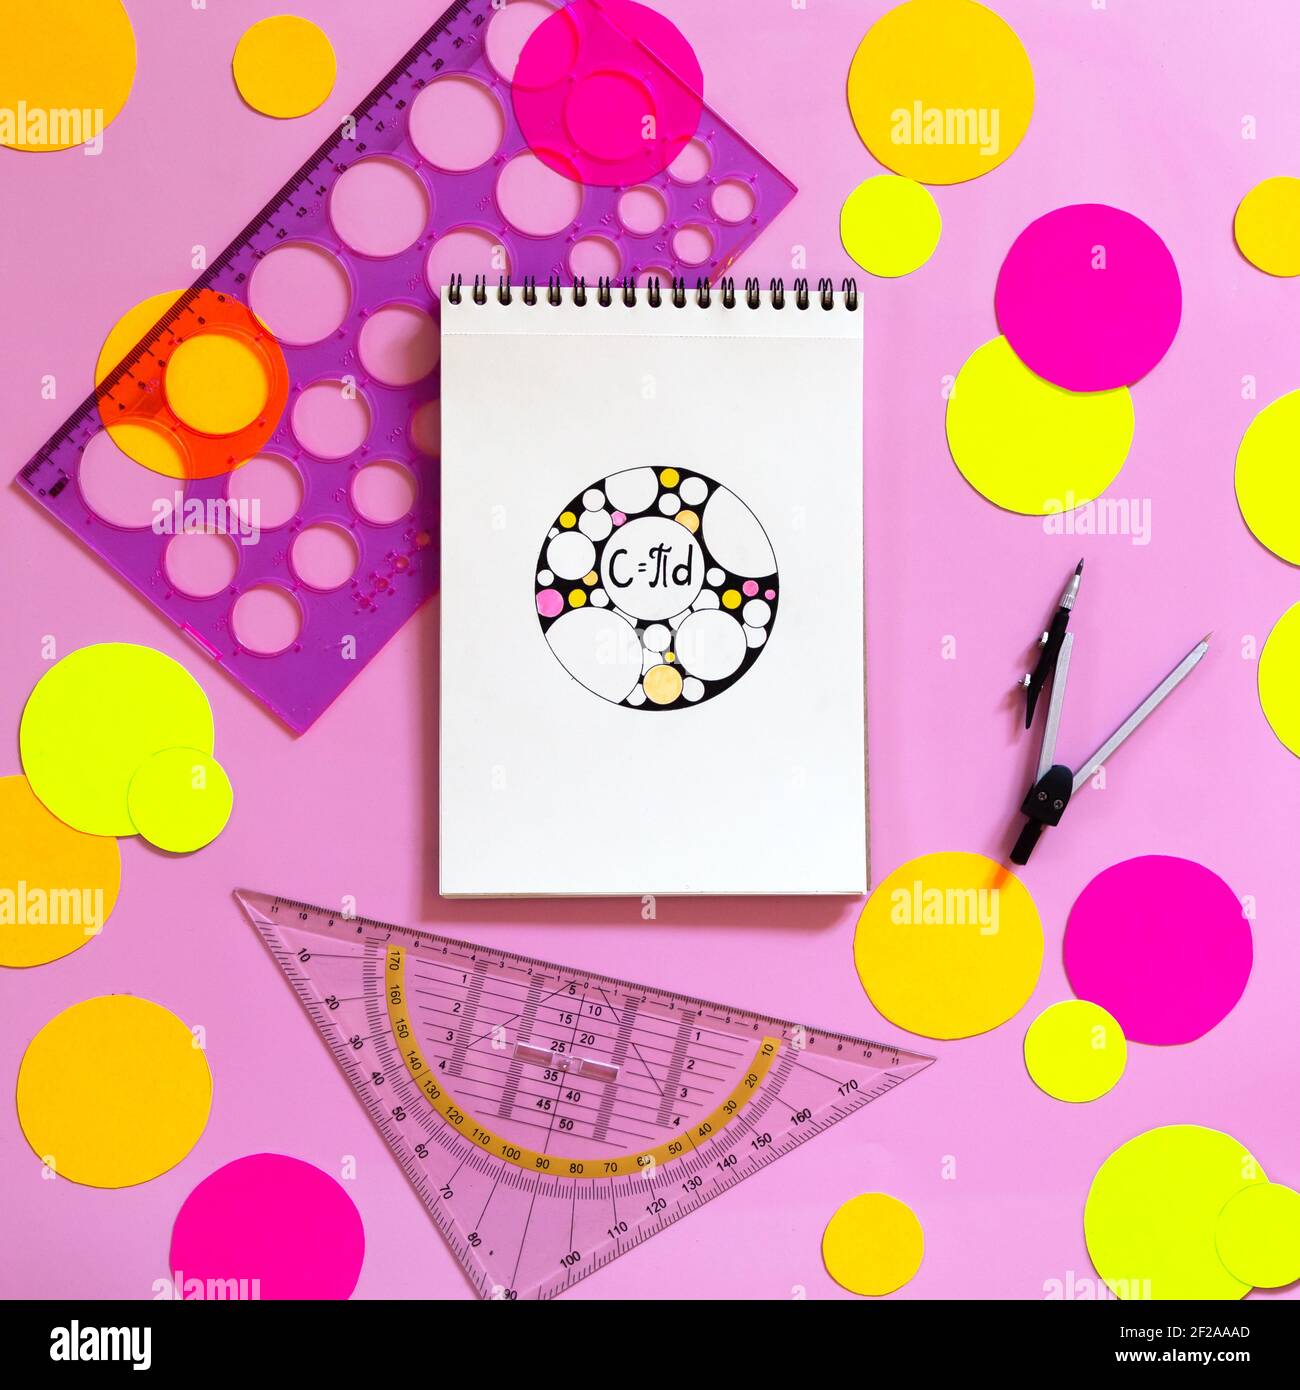 International Pi Day Happy Holiday Concept. Multicolored paper circles, school supplies and sketchbook with doodle zenart circle and circumference for Stock Photo